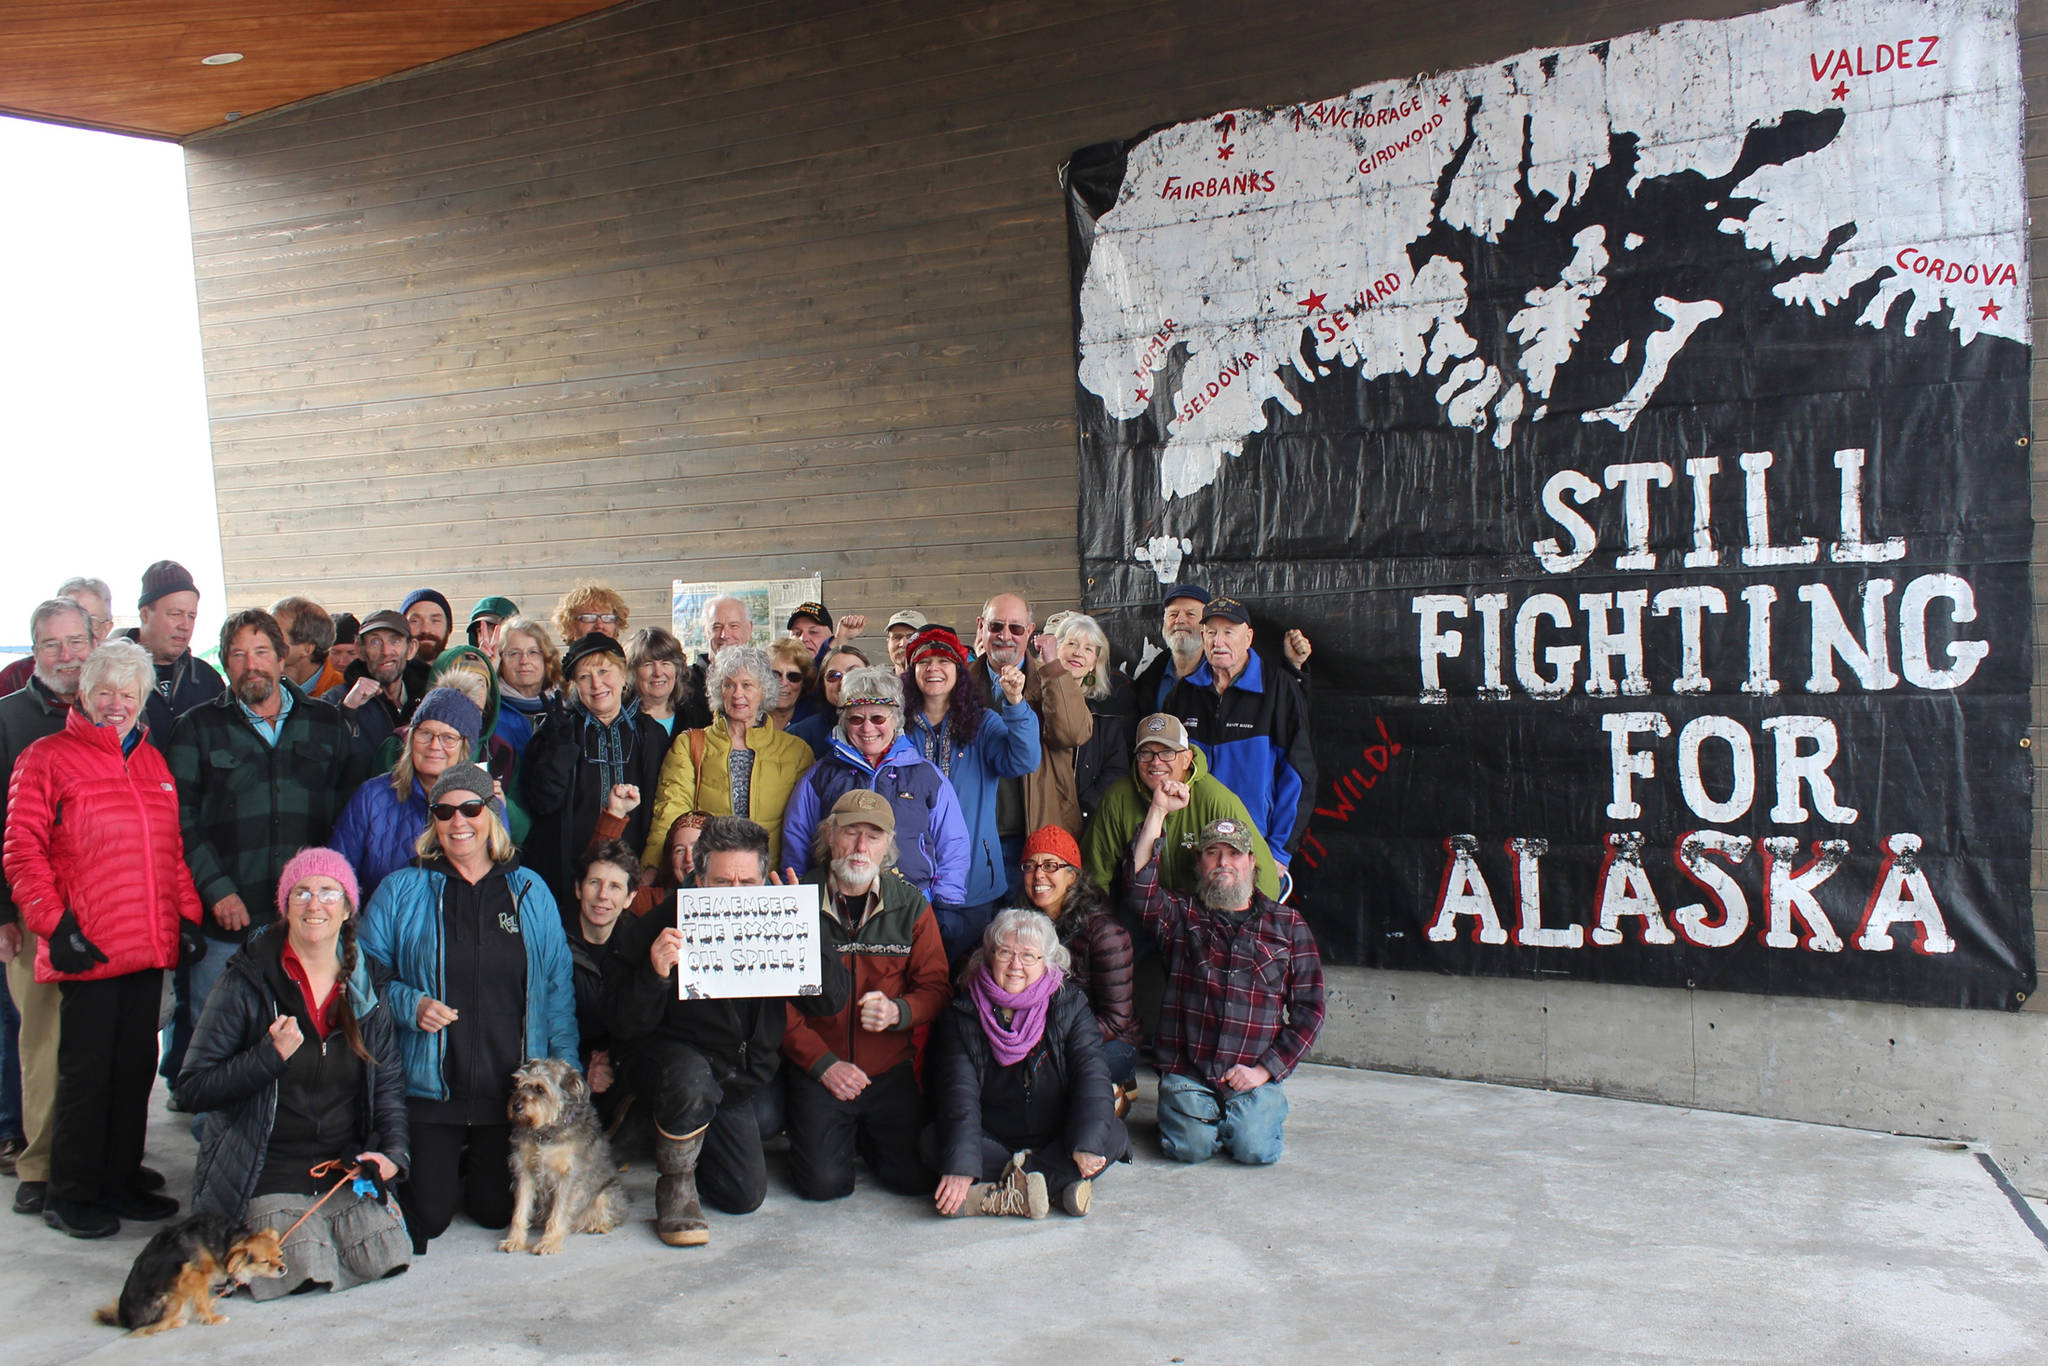 Homer-area residents pose in front of the “Still Fighting for Alaska” banner Homer artivist Mavis Muller made after the March 24, 1989, grounding of the Exxon Valdez, during a gathering on Sunday, March 24, 2019 on the Homer Spit in Homer, Alaska. A tear in the tanker’s hull allowed millions of gallons of Alaska crude to spill into Prince William Sound, fouling more than a thousand miles of Alaska’s coastline. (Photo by McKibben Jackinsky)